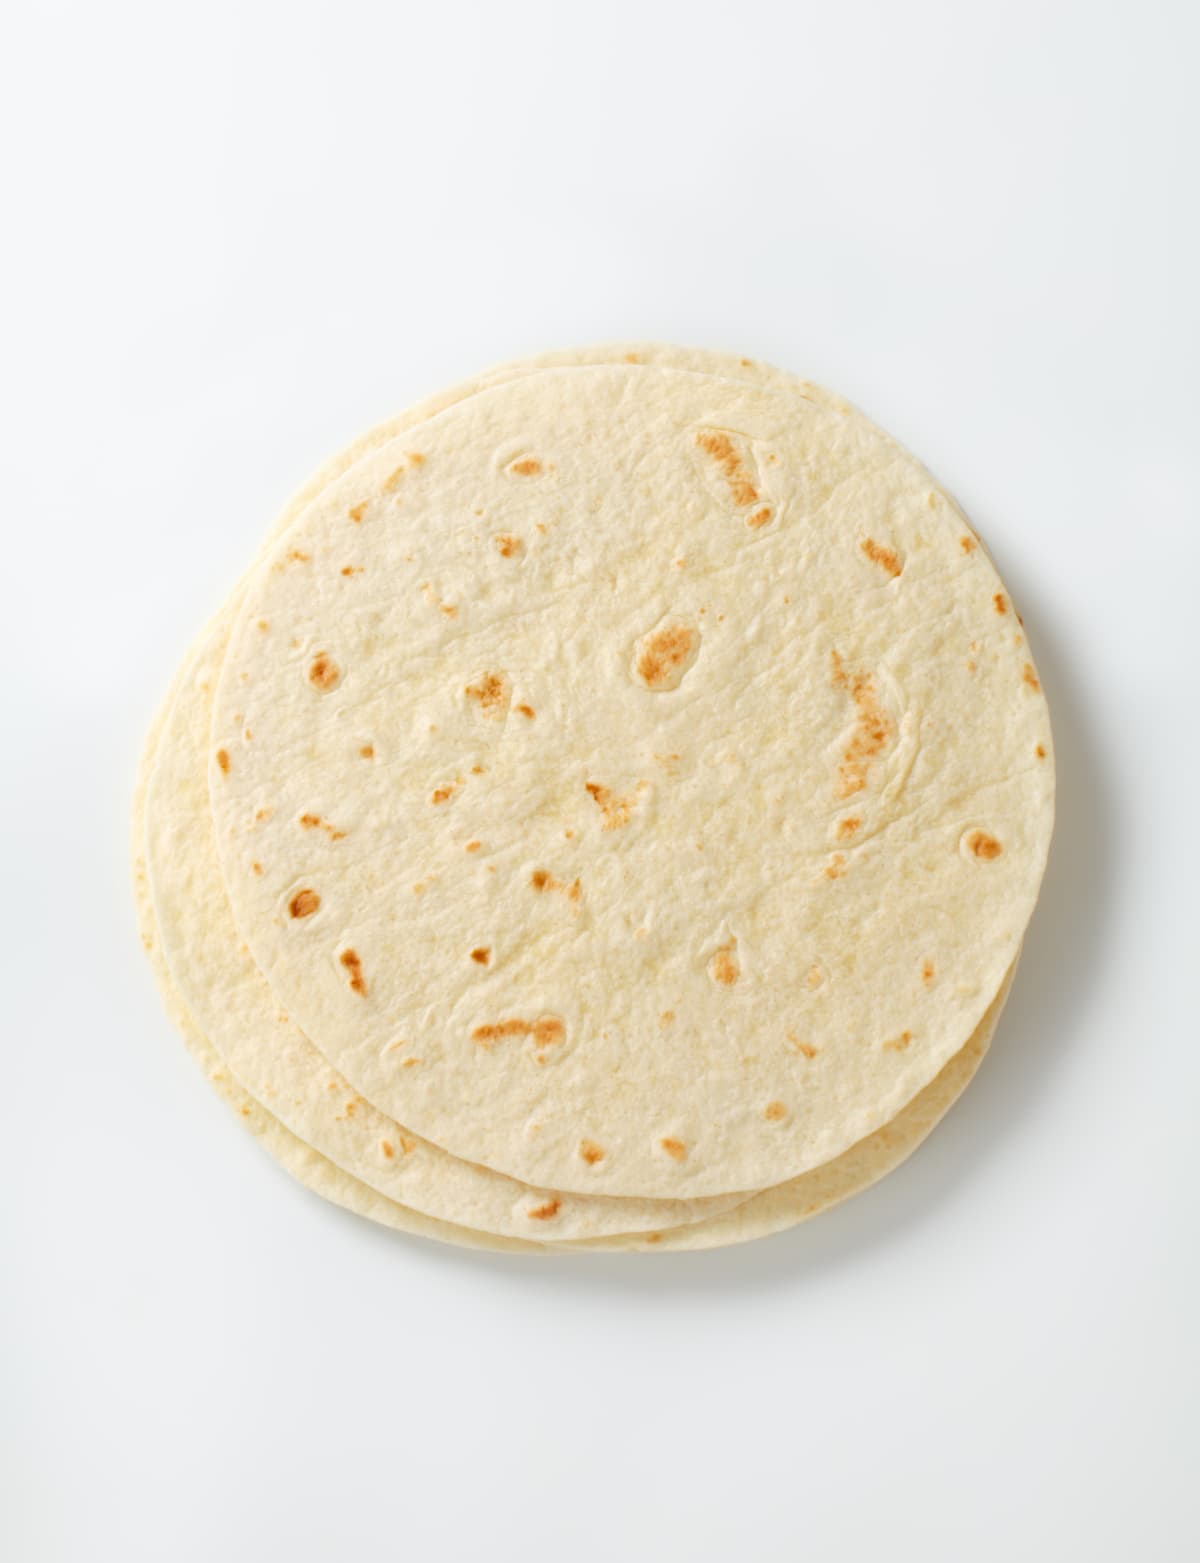 Stack of flour tortillas on a white background